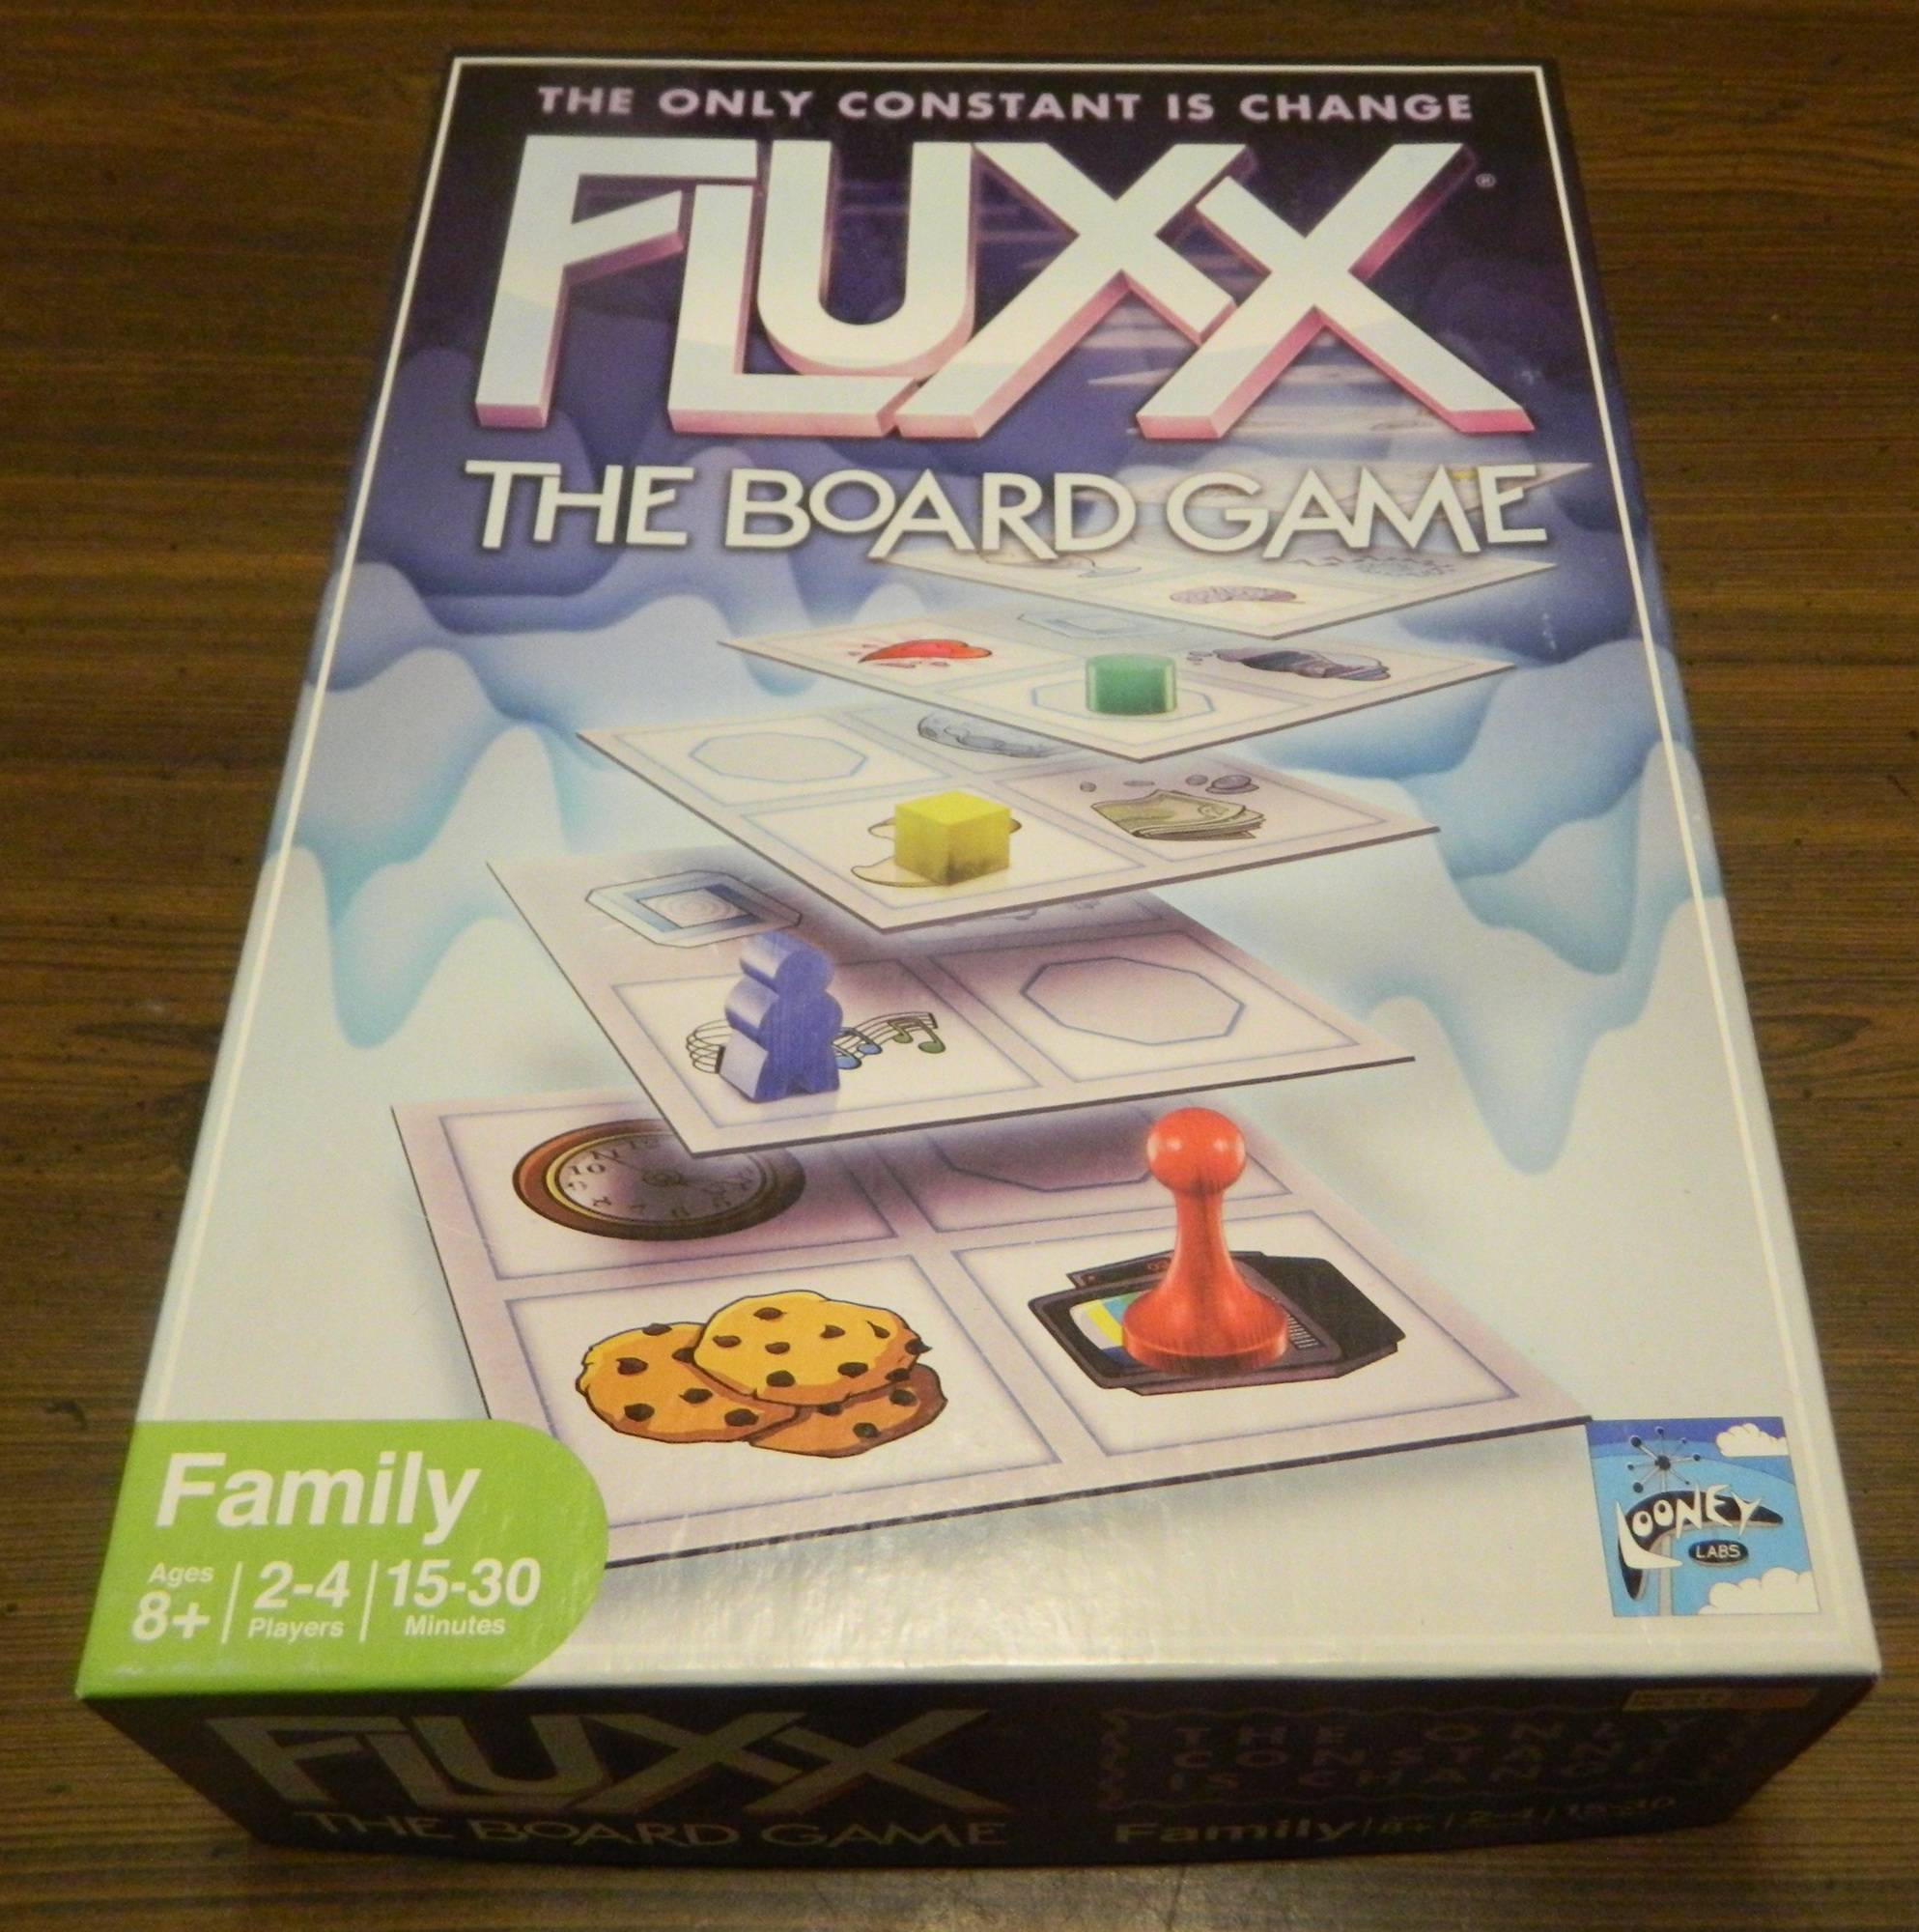 Fluxx The Board Game Review and Rules